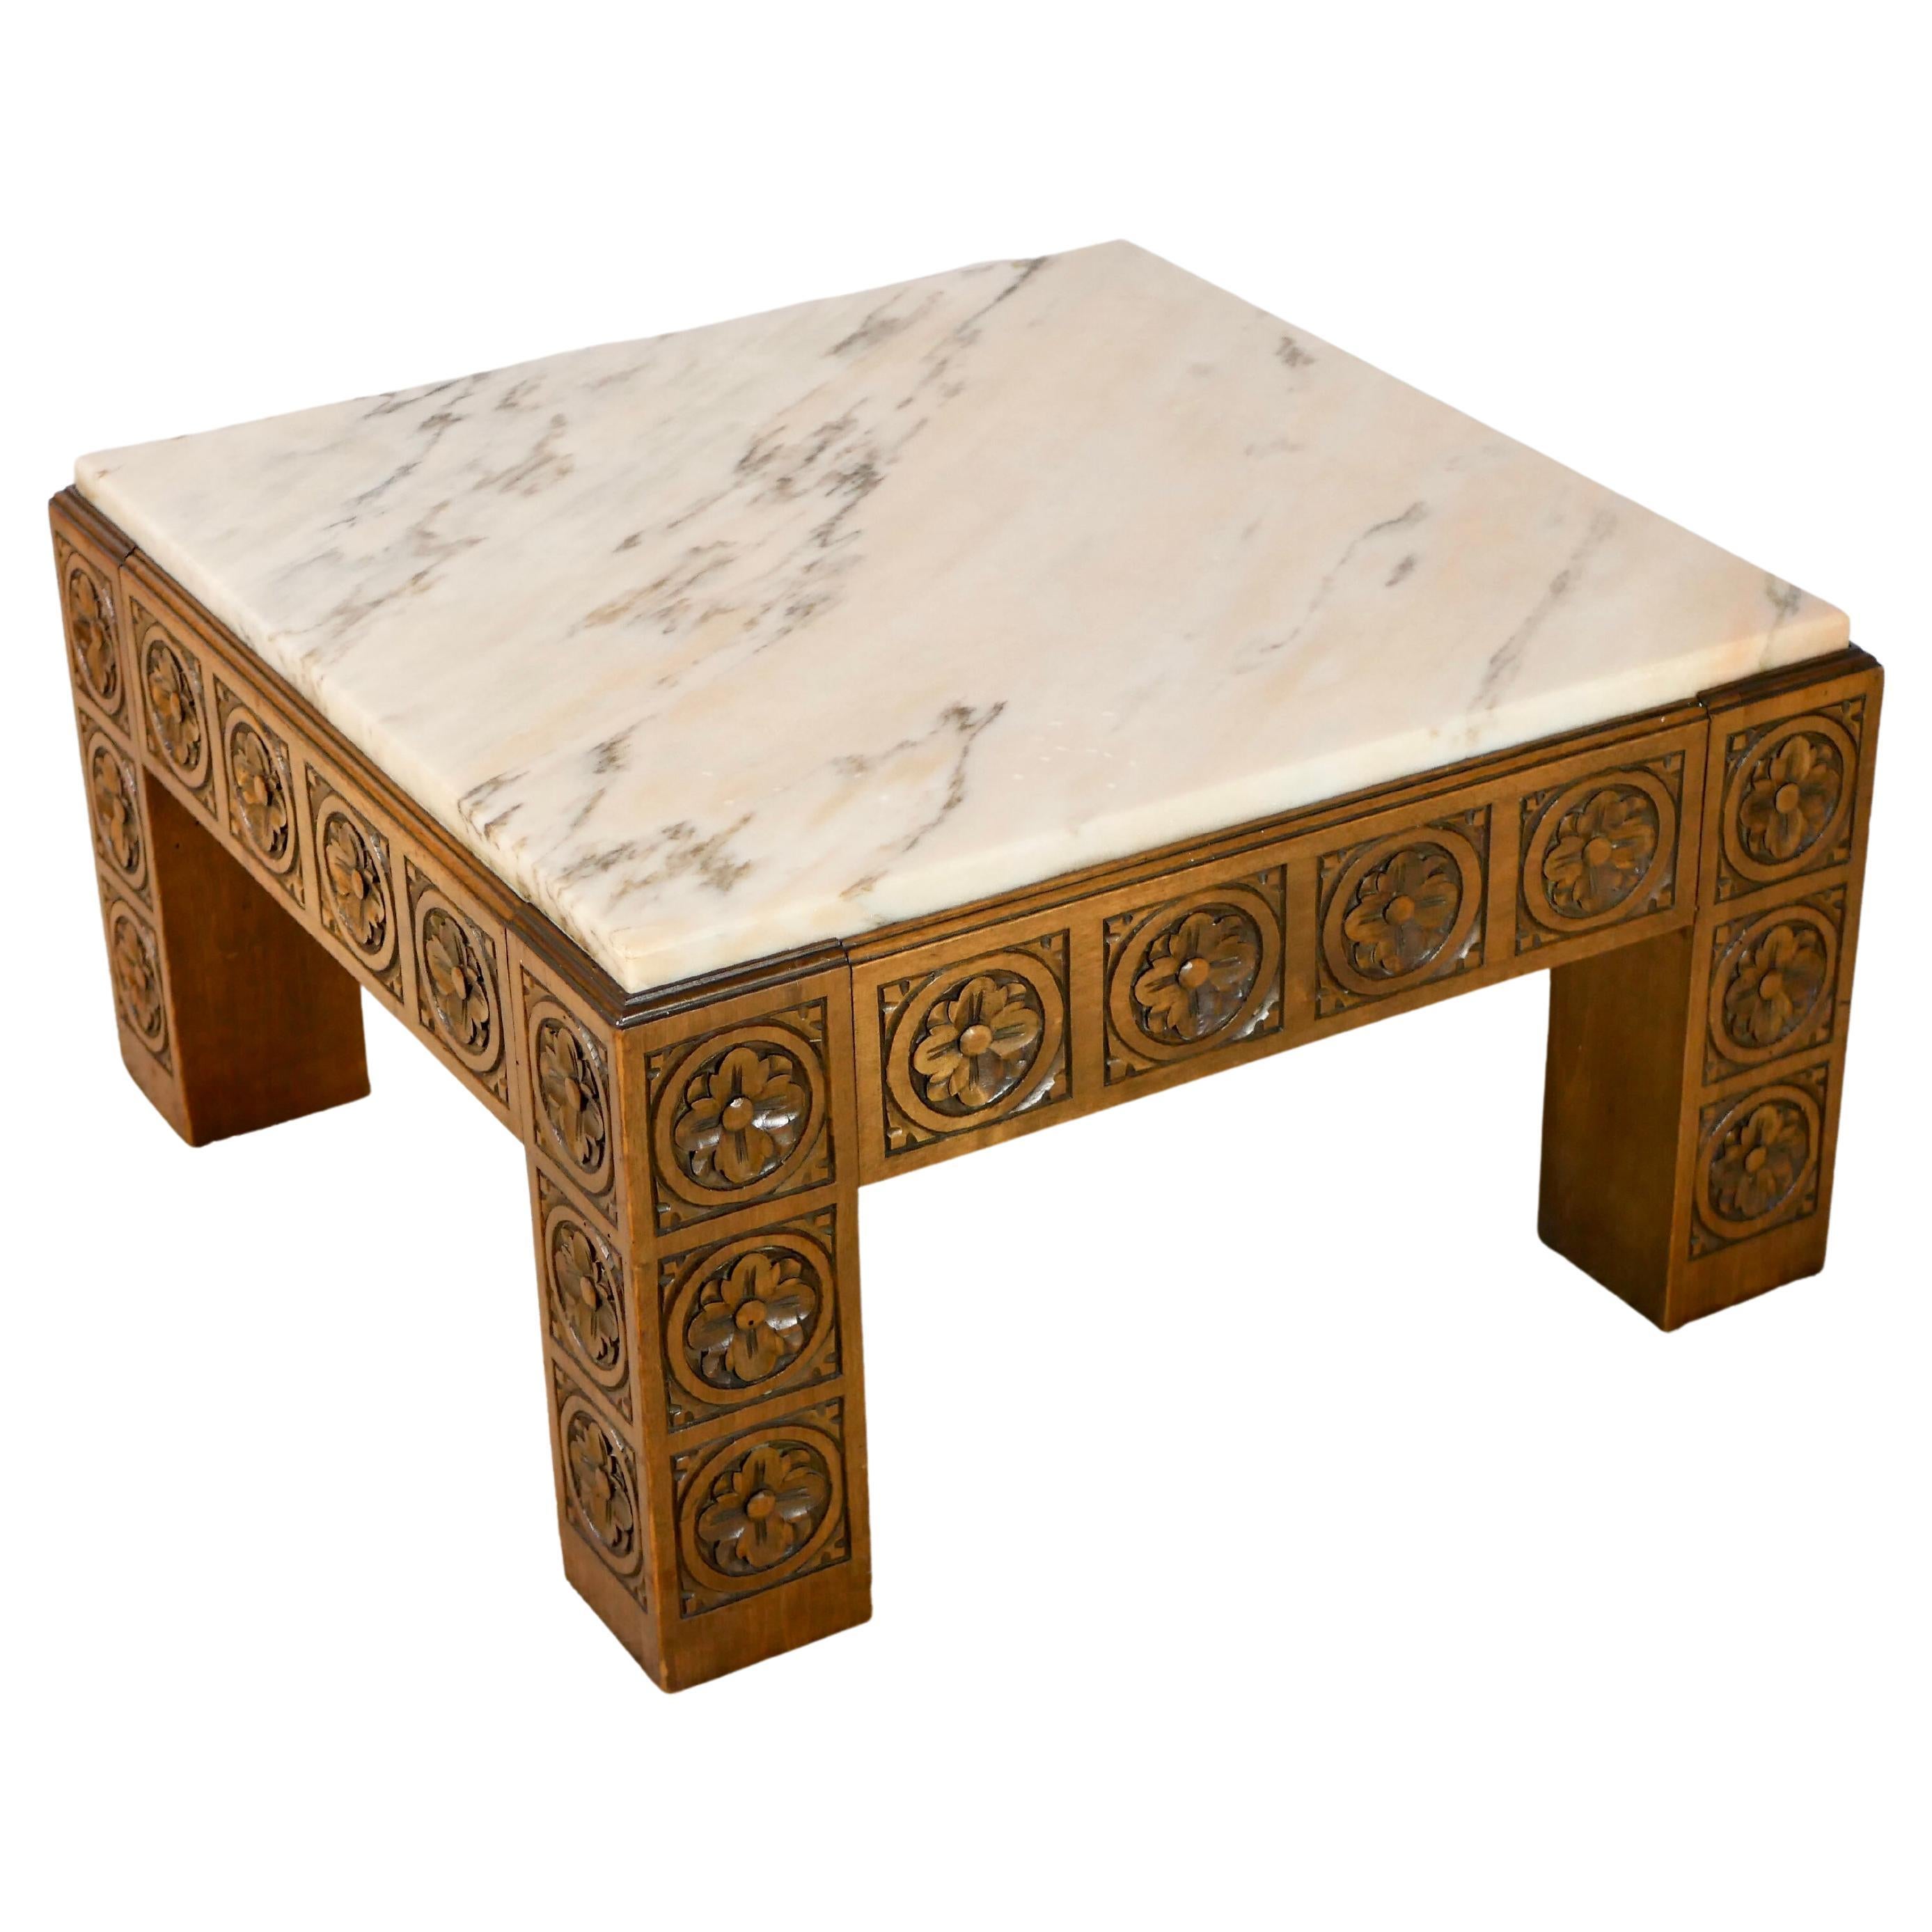 Stunning square coffee table from Spain, Mid-Century Modern style, probably made between the 1950 and 1965s.
Carved wood, and marble.
Few scratches, and 1 chipped edge but overall good condition.
Wood has been treated and oiled.
Dimensions :